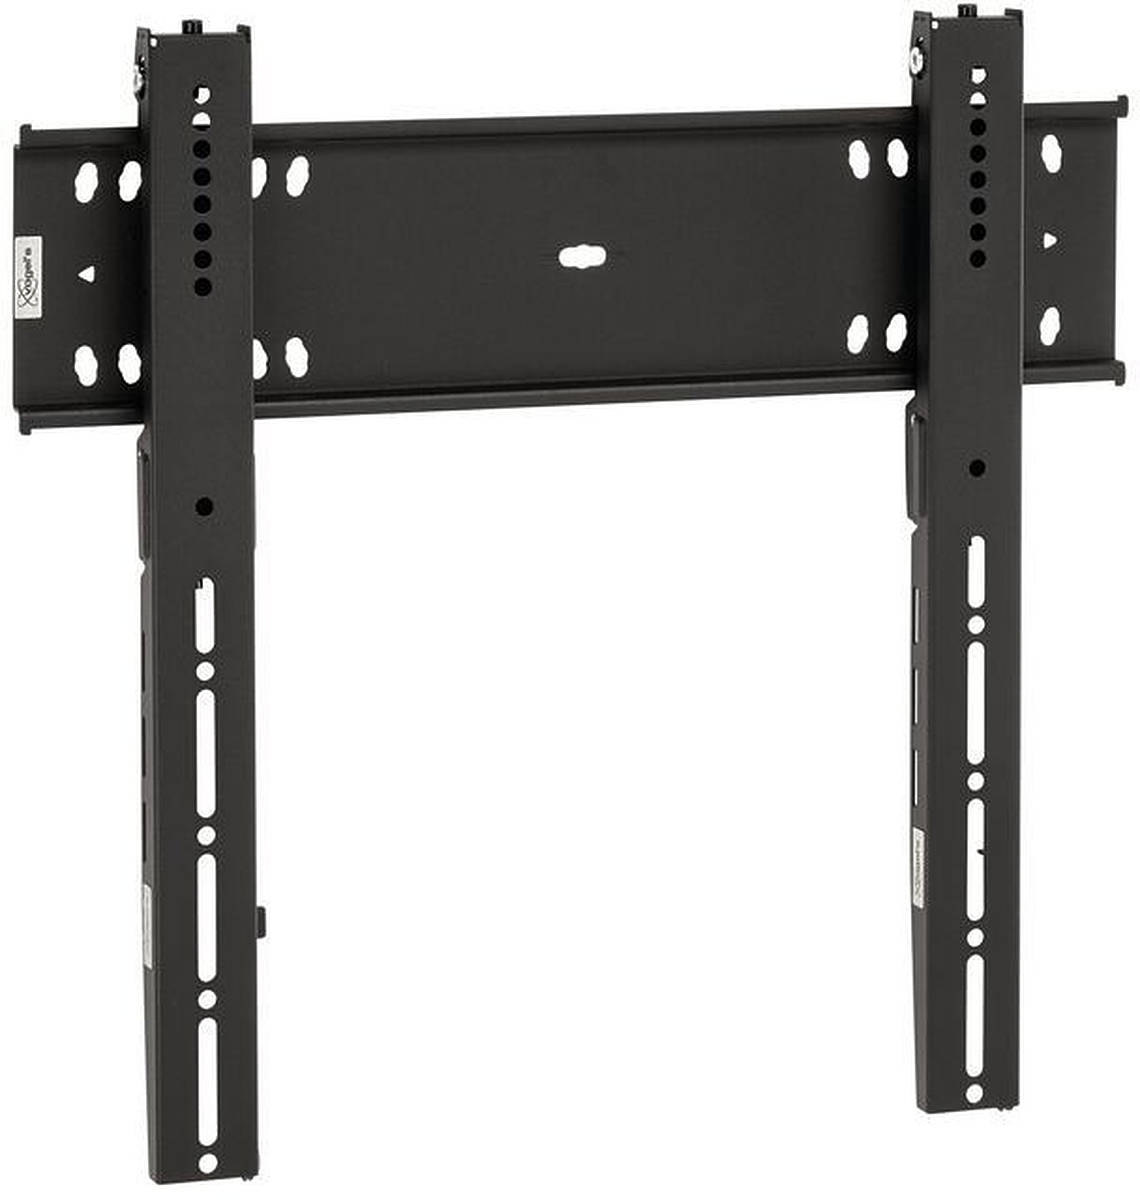 Vogels PFW6400 Lockable wall mount for 46-65 inch monitors product image. Click to enlarge.